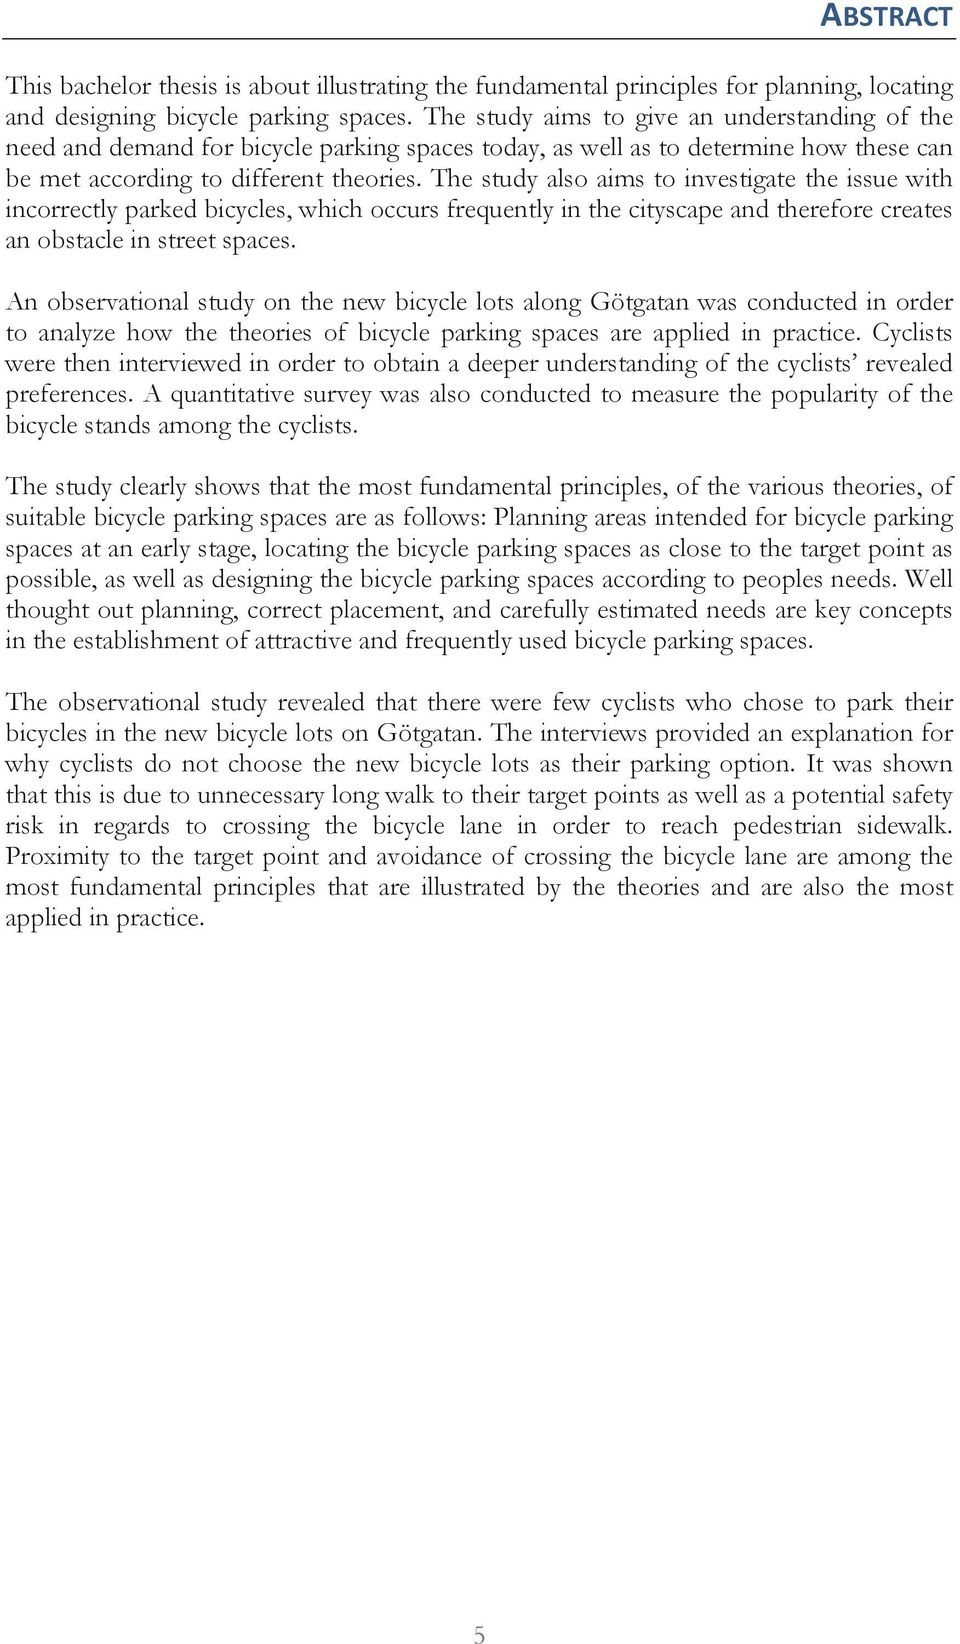 The study also aims to investigate the issue with incorrectly parked bicycles, which occurs frequently in the cityscape and therefore creates an obstacle in street spaces.